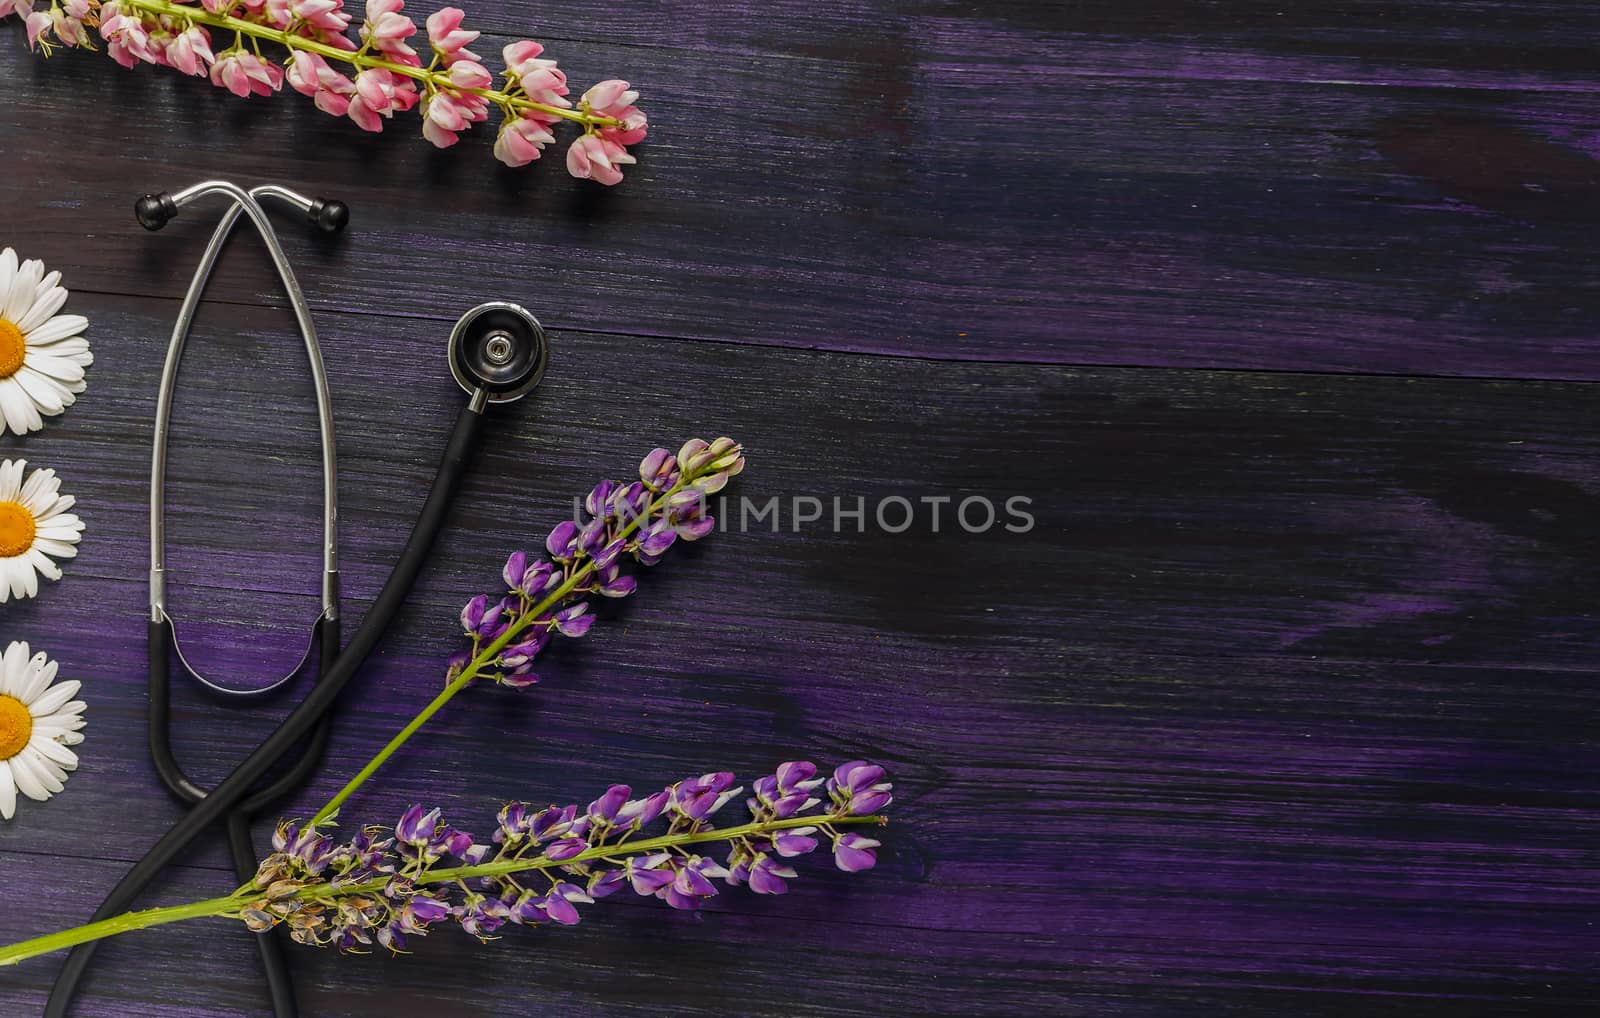 Still life made of stethoscope and flowers. Coronavirus, COVID-19 quarantine concept, second wave. Medical supplies, medical equipment concepts